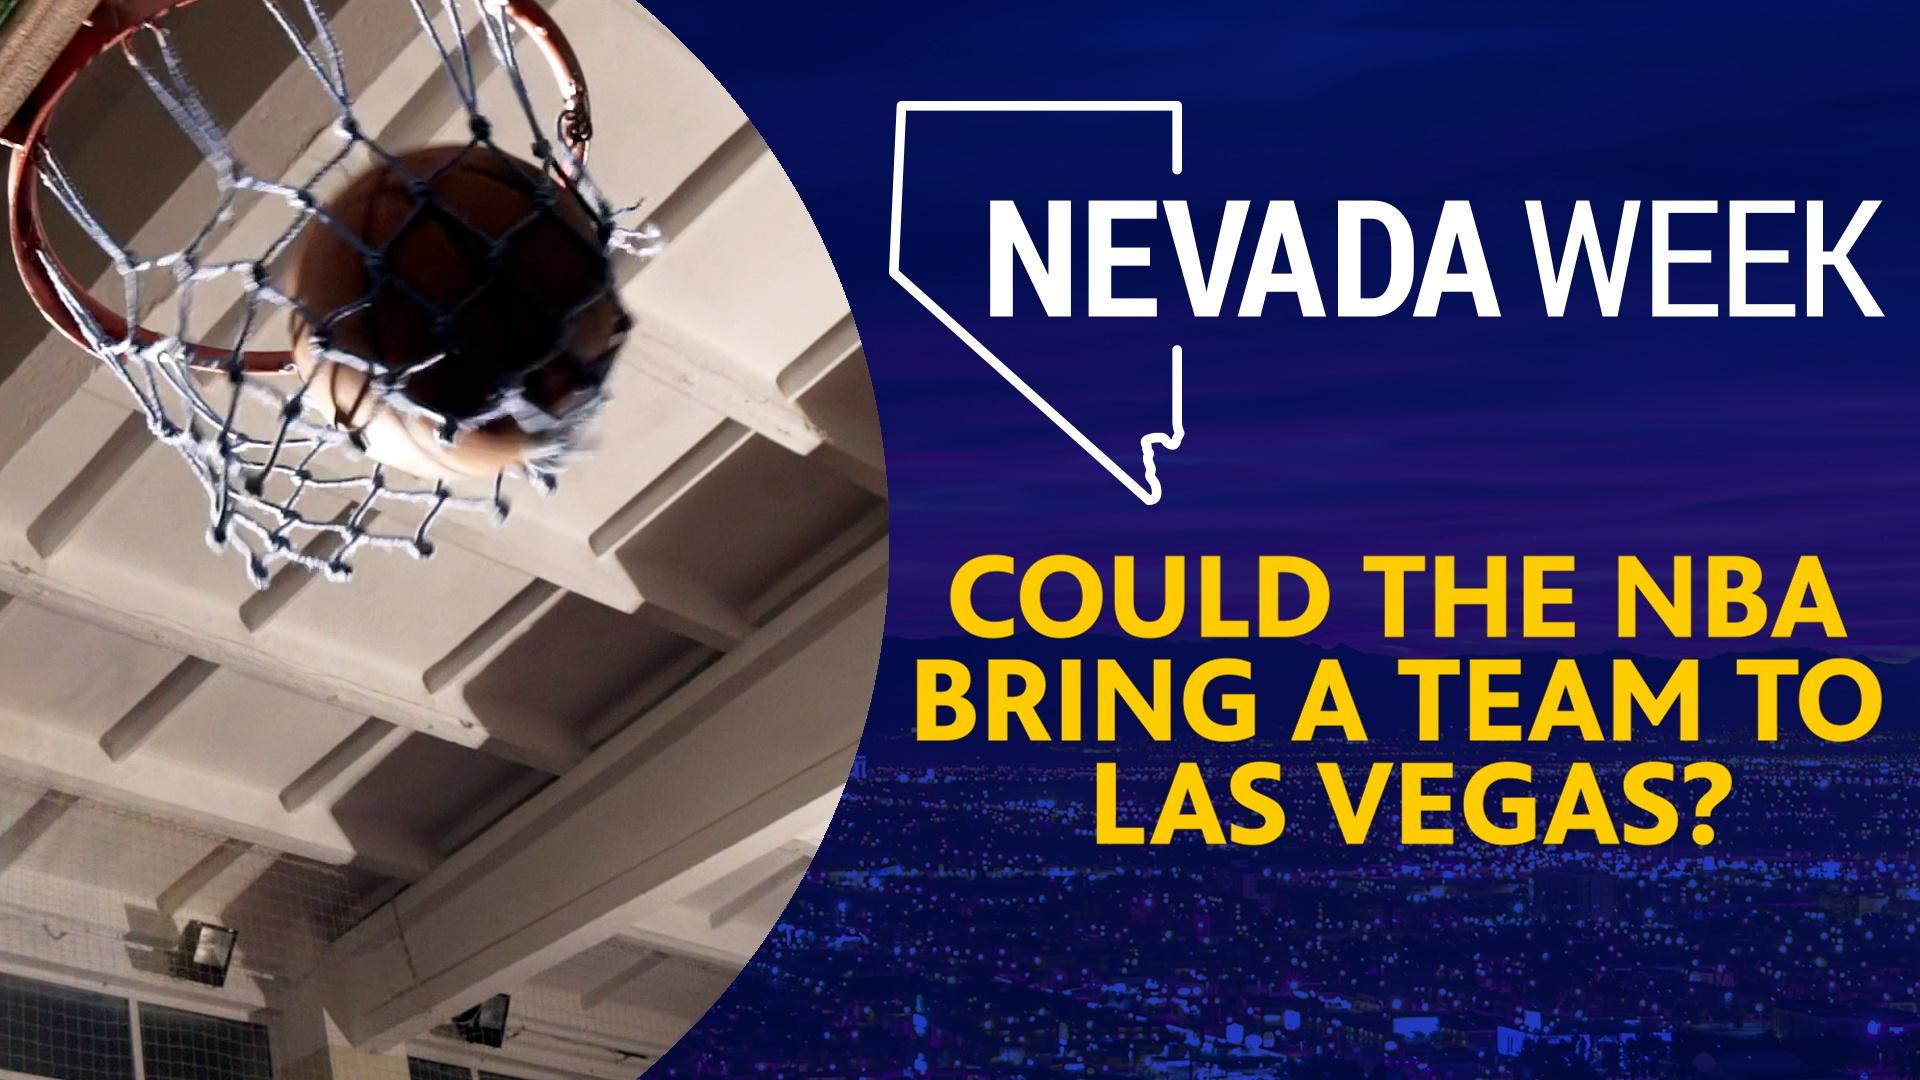 Could the NBA Bring a Team to Las Vegas?